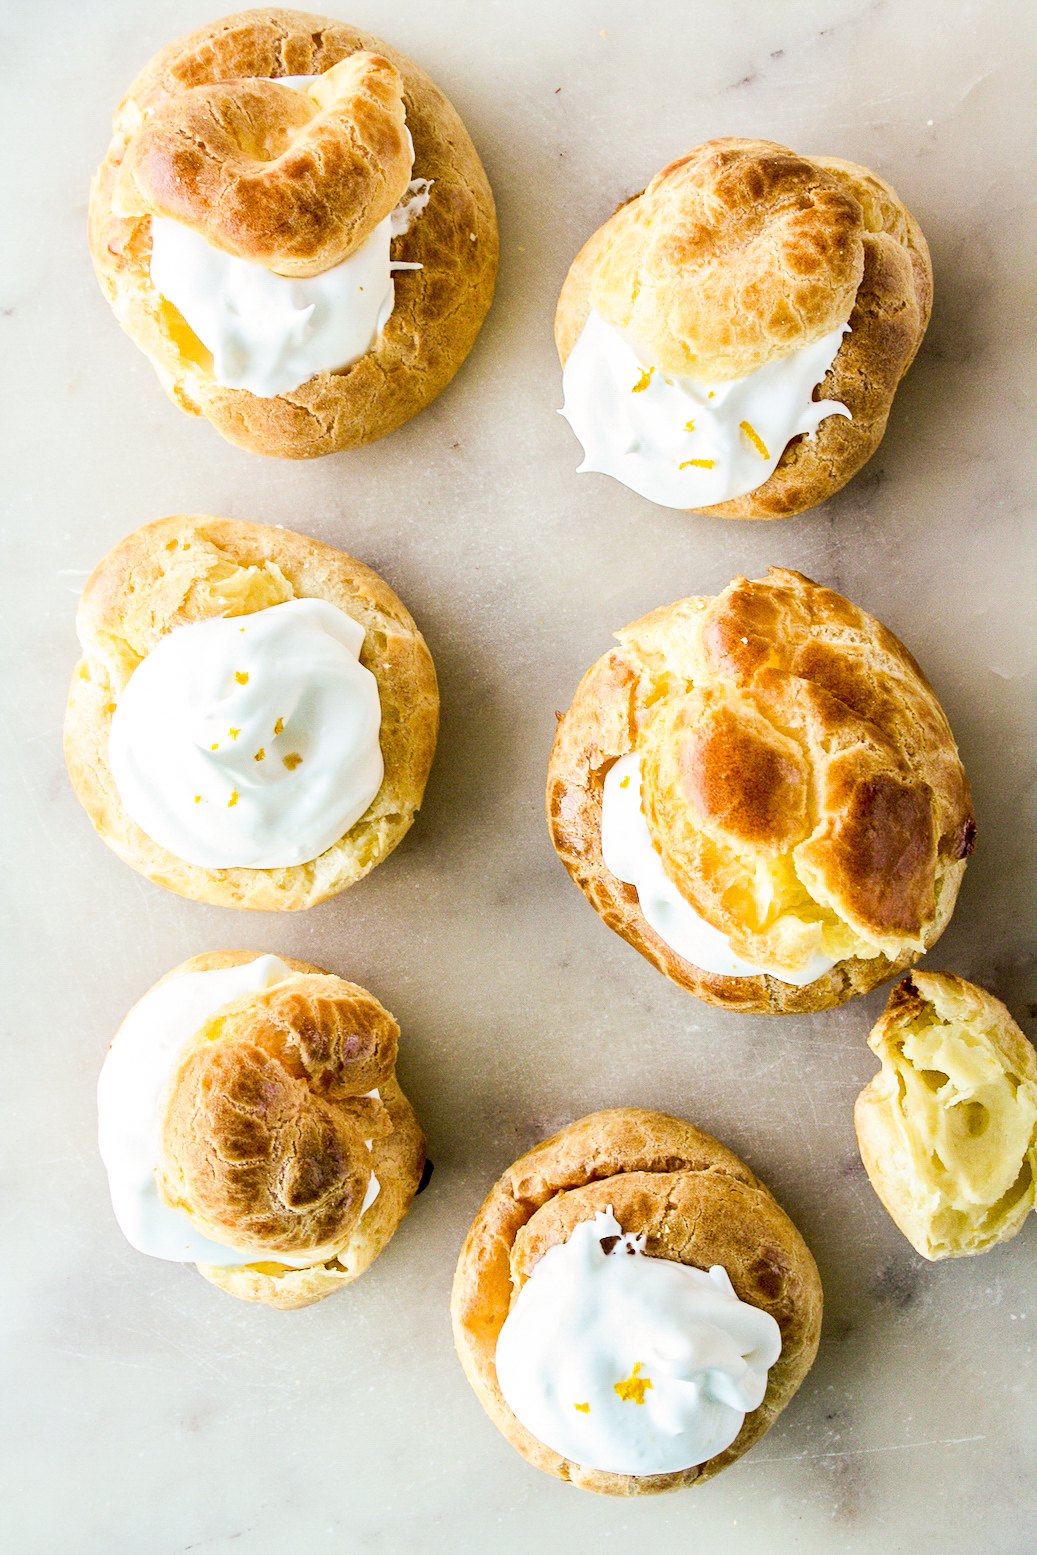 Chocolate orange creams puffs with homemade choux pastry